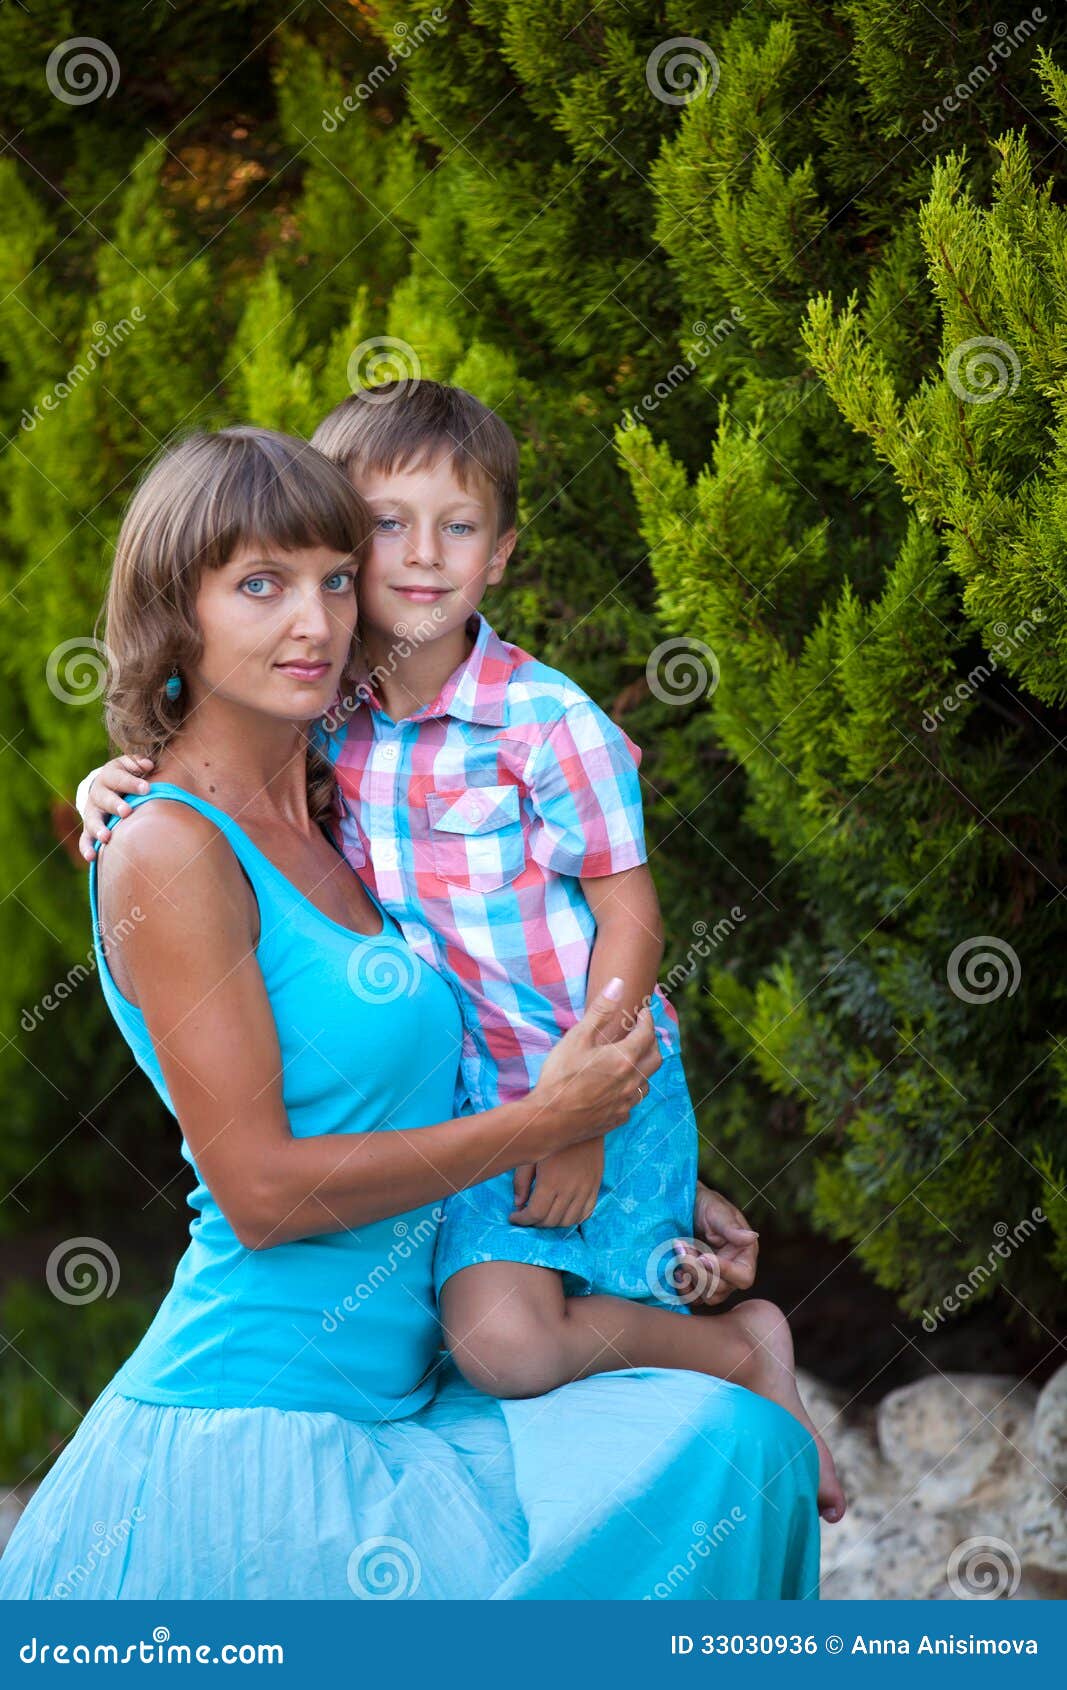 Mother and son in garden stock photo. Image of female - 33030936